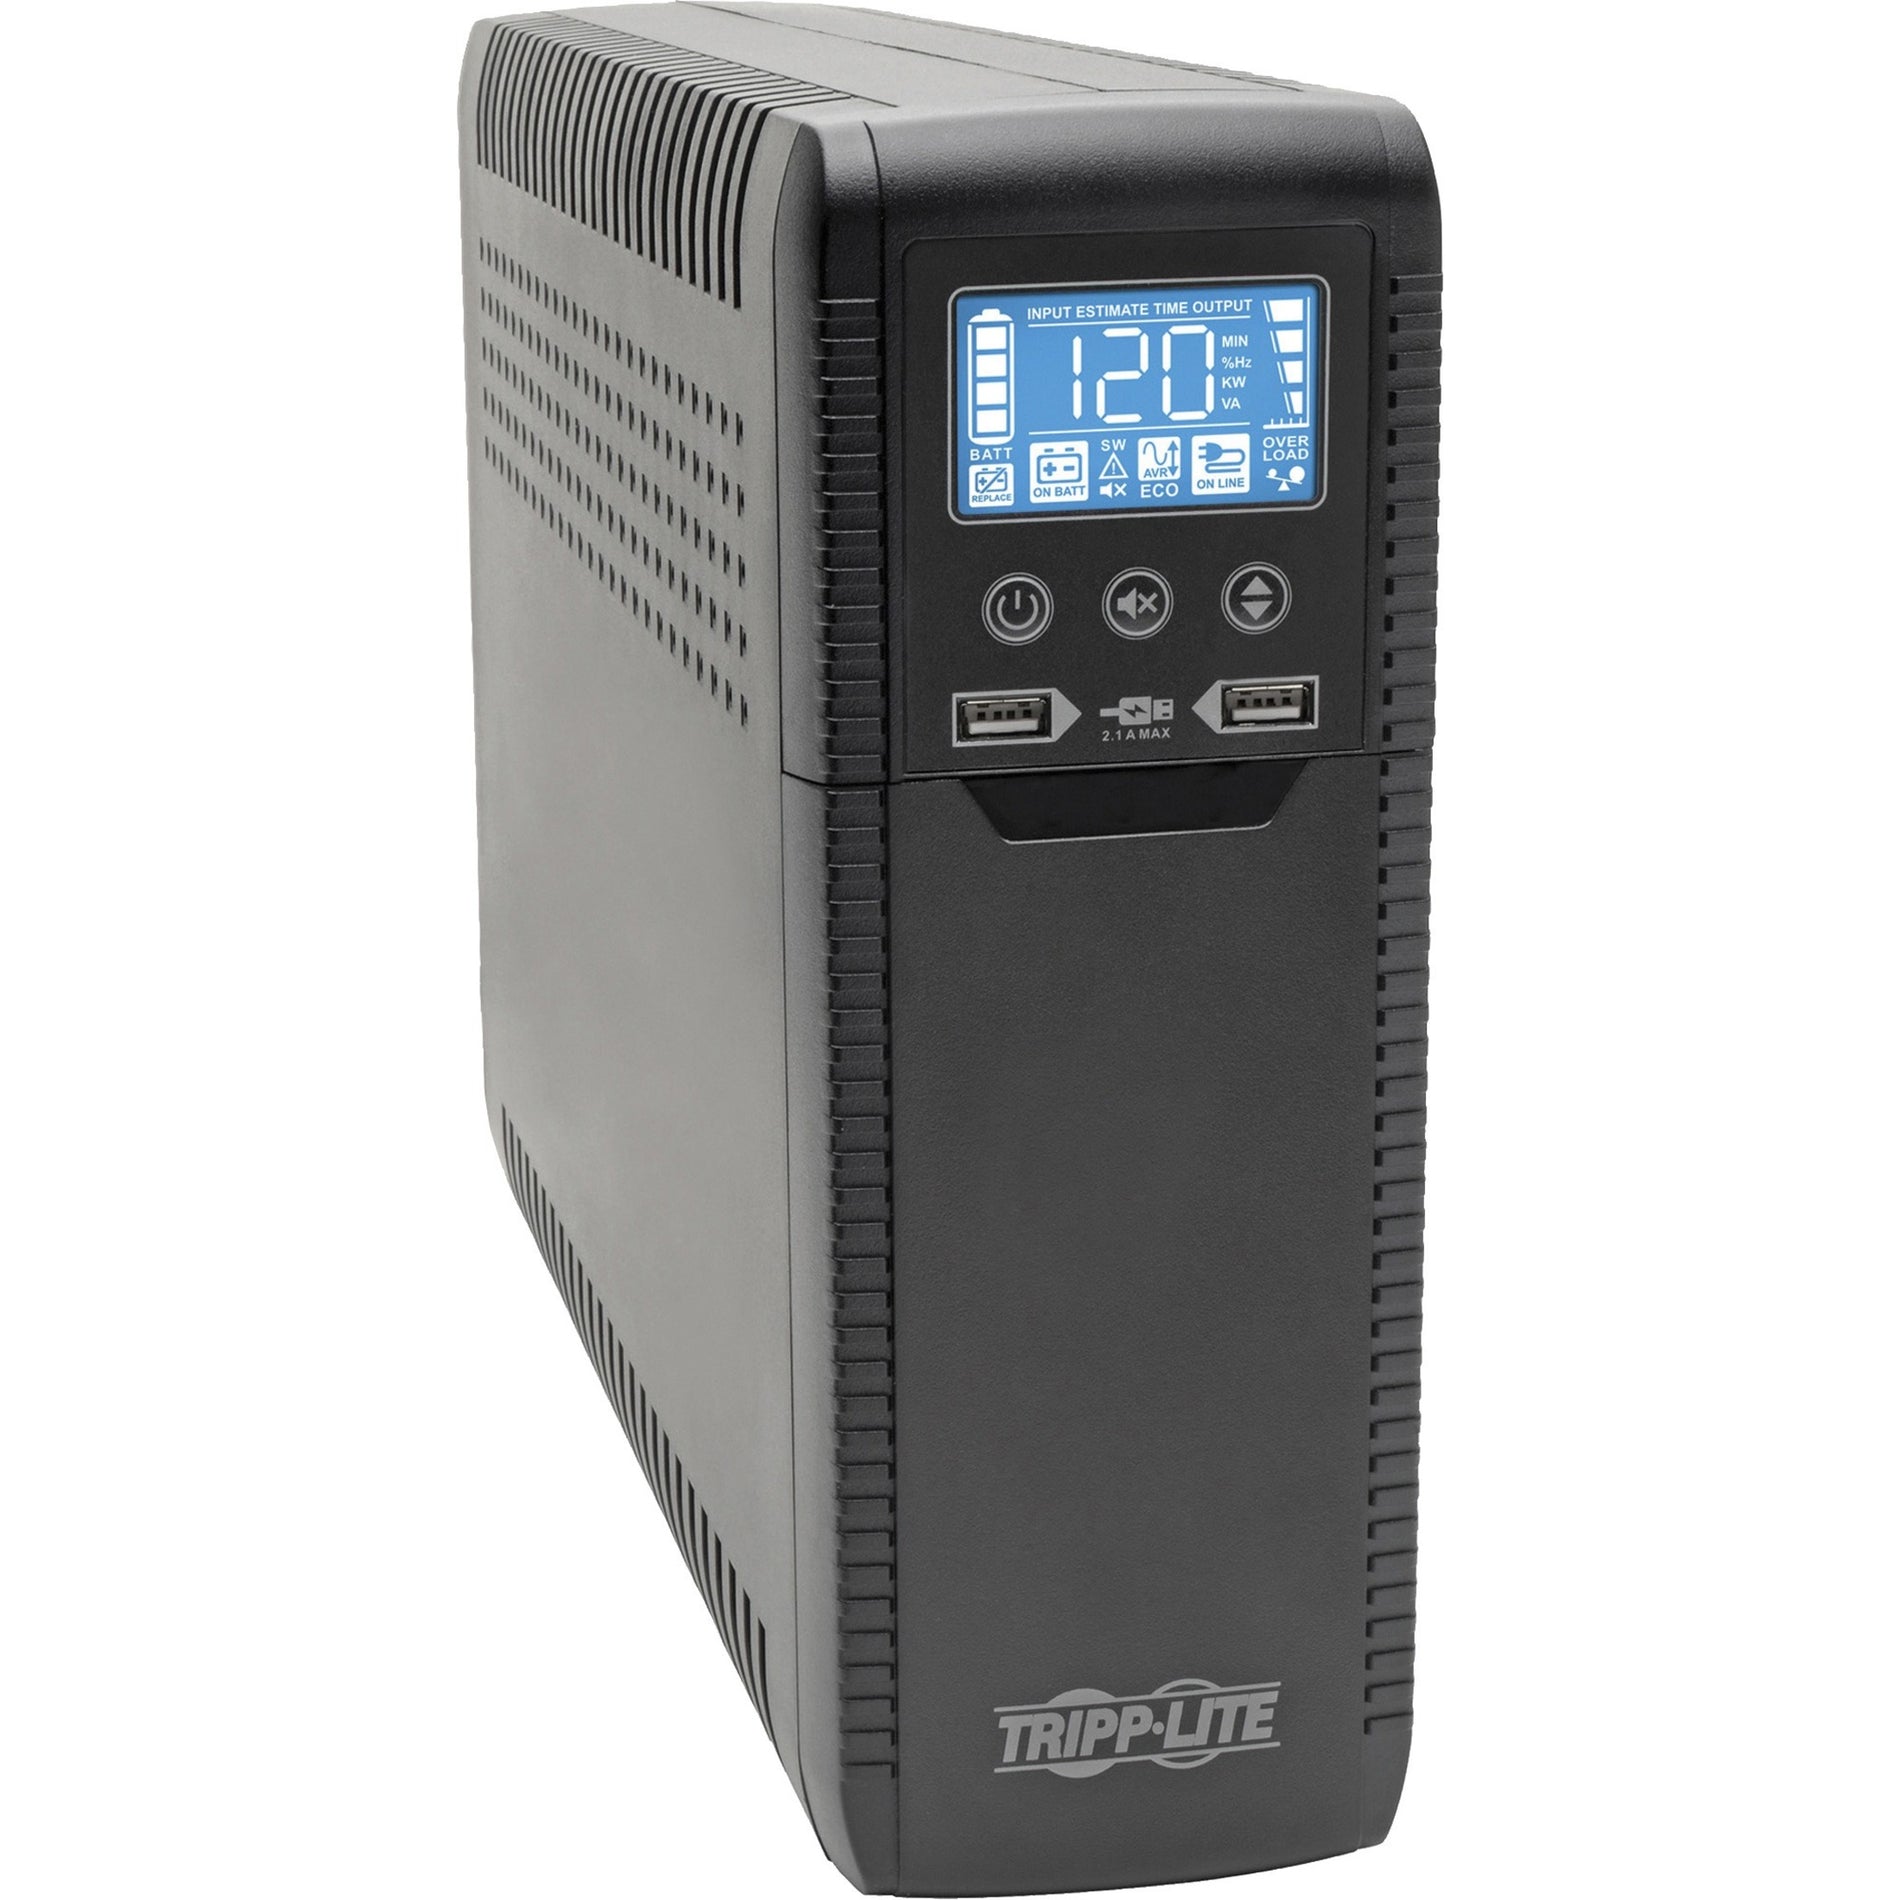 Tripp Lite ECO1500LCD 1440VA Tower UPS, 10 Outlets, Energy Star Certified